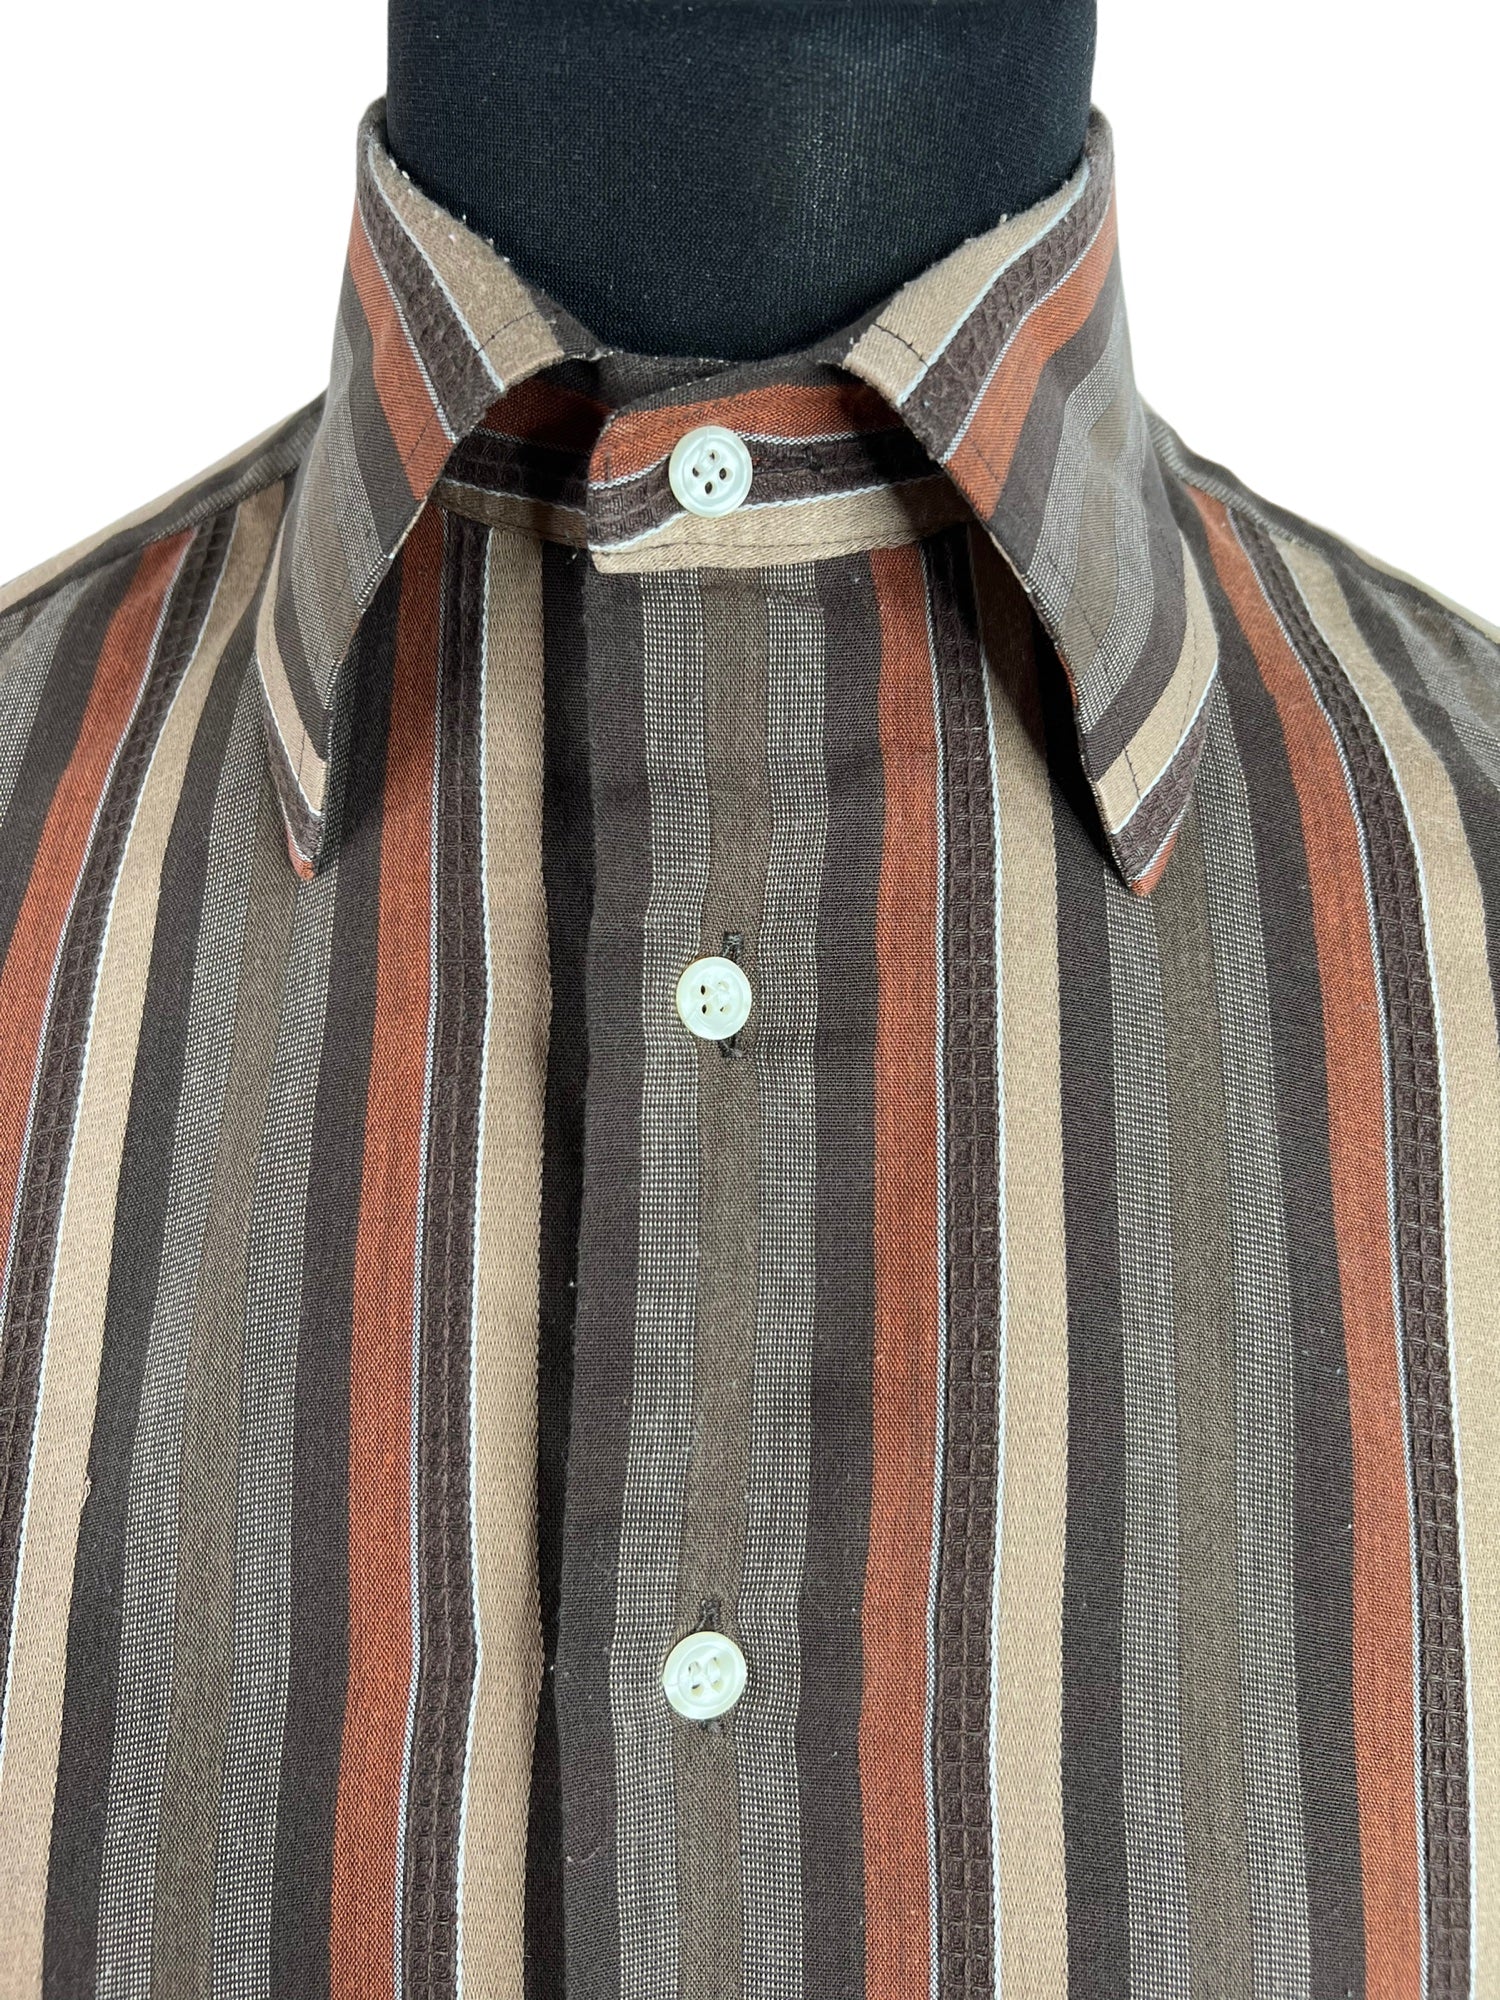 zero waste vintage Van Heusen Urban Village Vintage urban village UK top thrifted thrift sustainable style stripey Stripes striped stripe detailing stripe detail stripe store slow fashion shop Shirt second hand save the planet reuse recycled recycle recycable preloved pockets online novelty print novelty Mens Shirts mens long sleeve L fashion ethical Eco friendly Eco dagger collar 70s 1970s